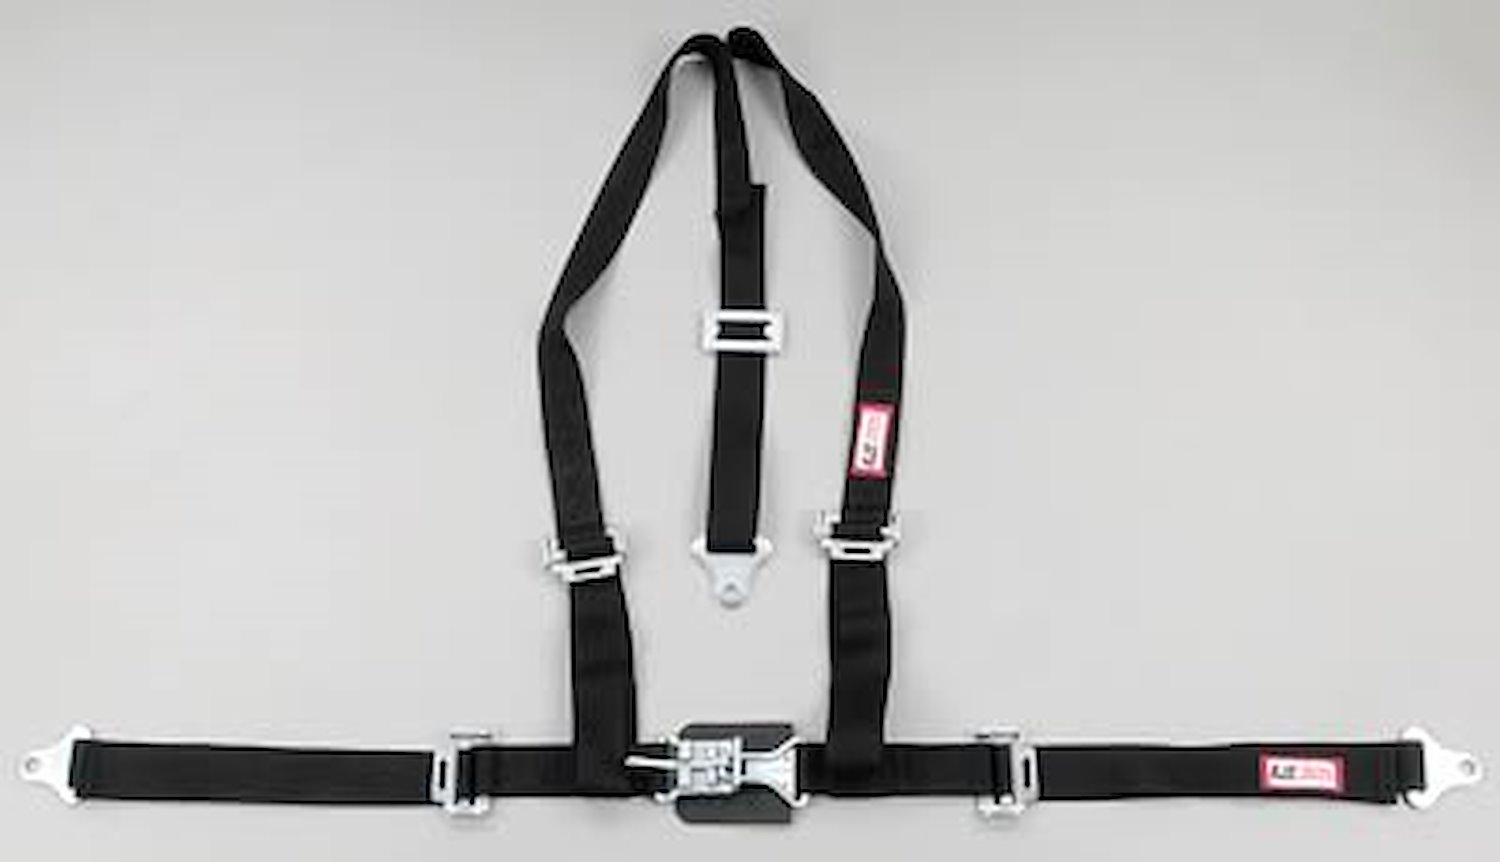 NON-SFI L&L HARNESS 2 PULL UP Lap Belt SNAP SEWN IN 2 S.H. Y FLOOR Mount WRAP/SNAP HOT PINK